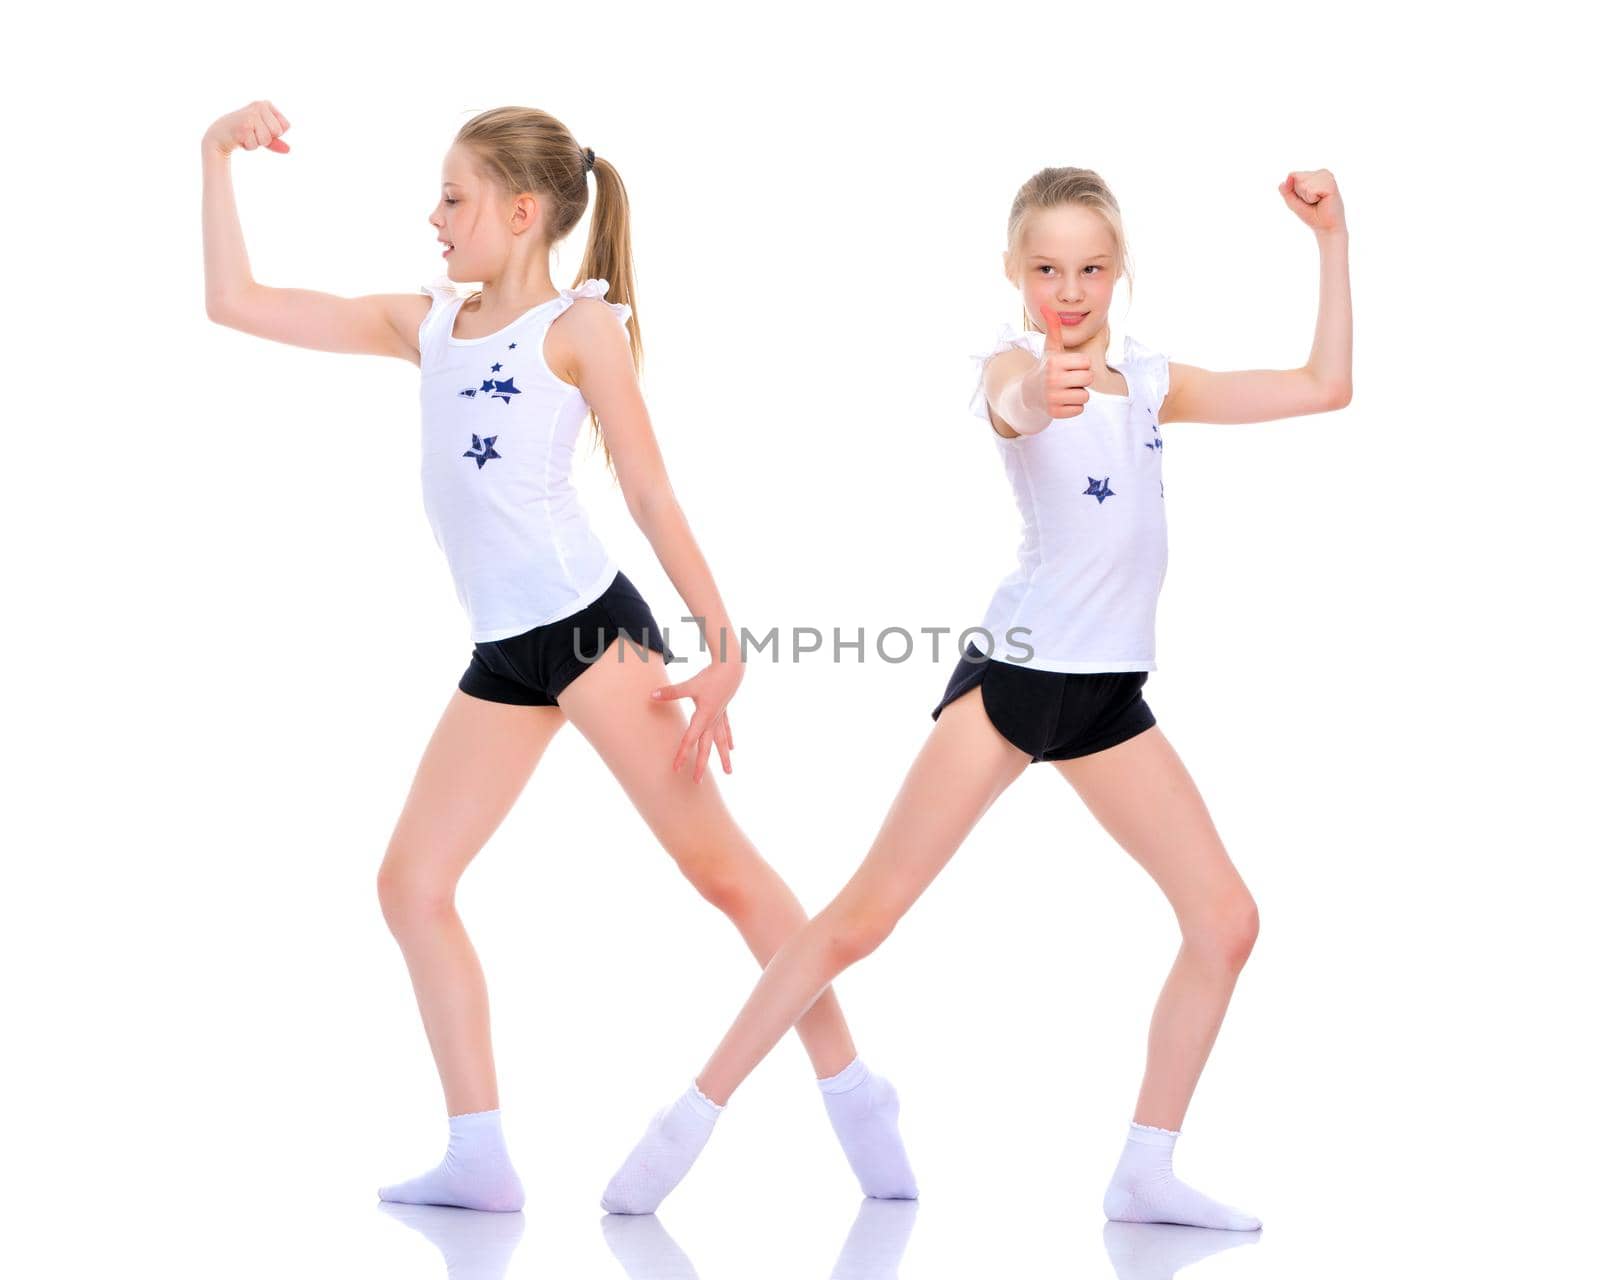 Jolly girls gymnasts are engaged in fitness, They show their muscles. Concept of children's sport, Happy people. Isolated on white background.